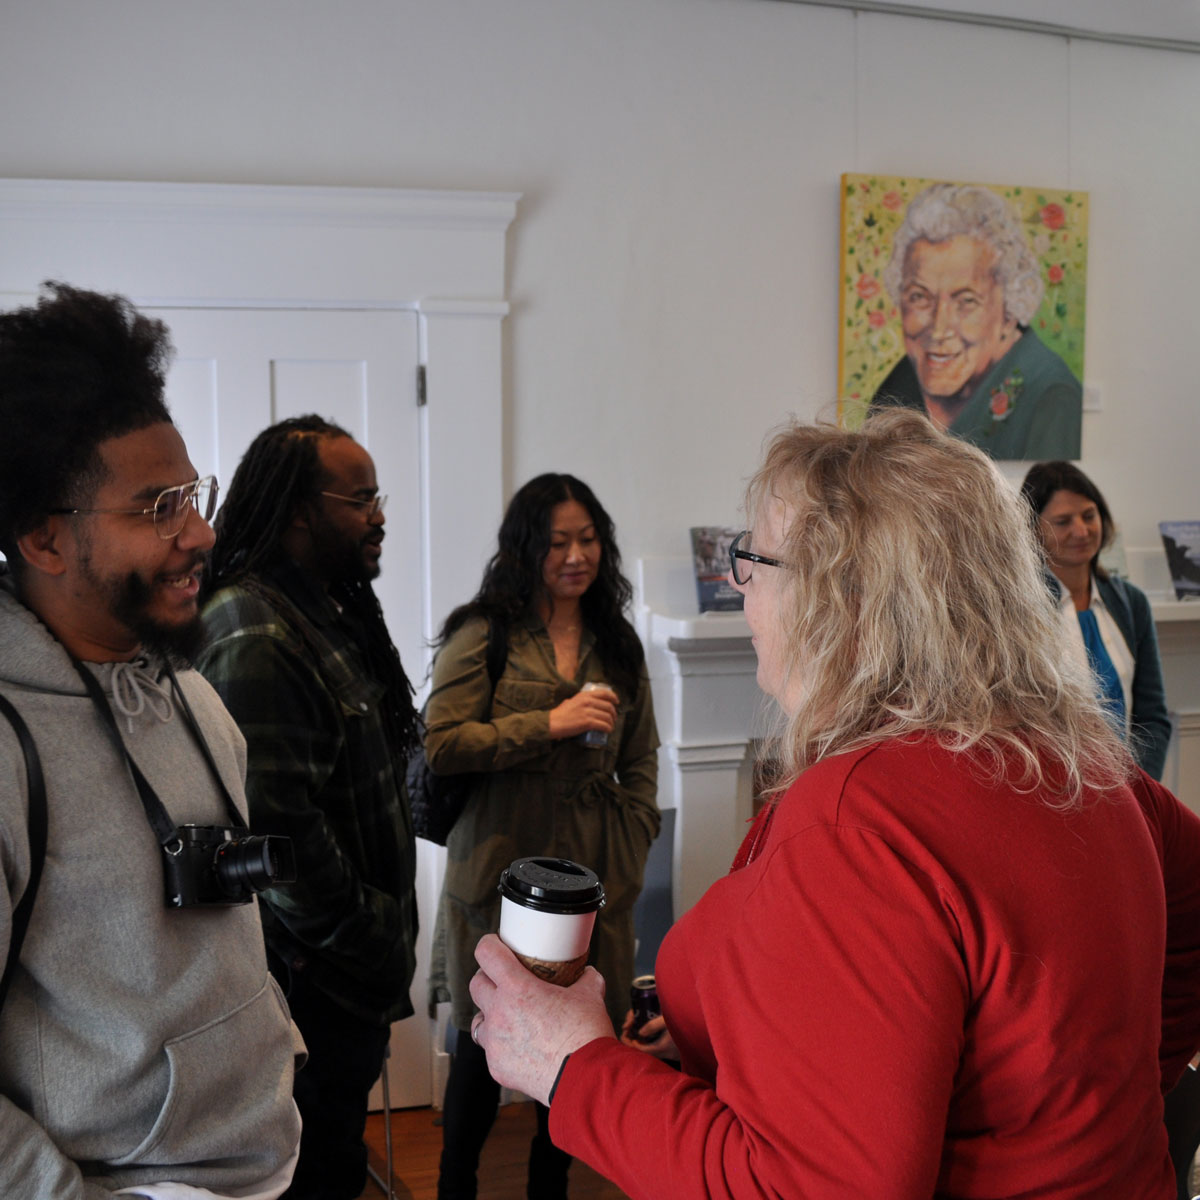 people gathered at an event in a white room with a portrait on the wall. In the foreground two people are conversing: a Black man with an afro and a camera around his neck and a white woman with shoulder-length blond hair, and holding a coffee cup.